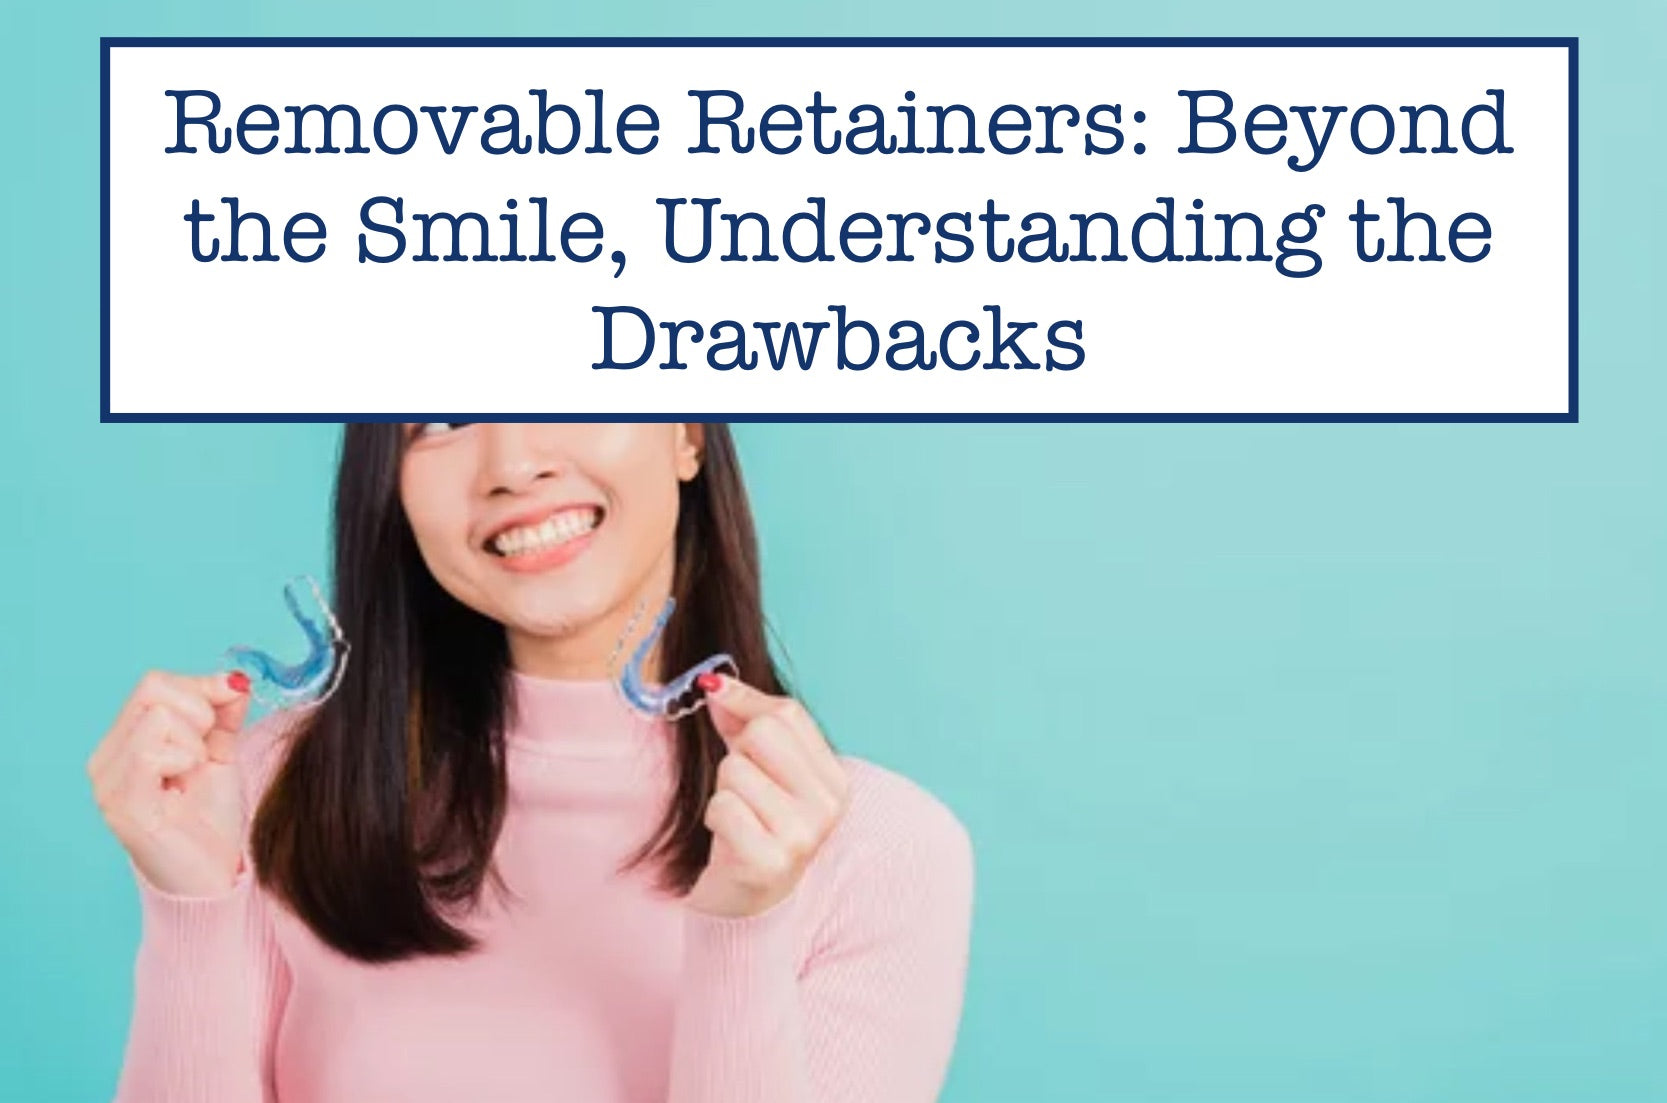 Removable Retainers: Beyond the Smile, Understanding the Drawbacks